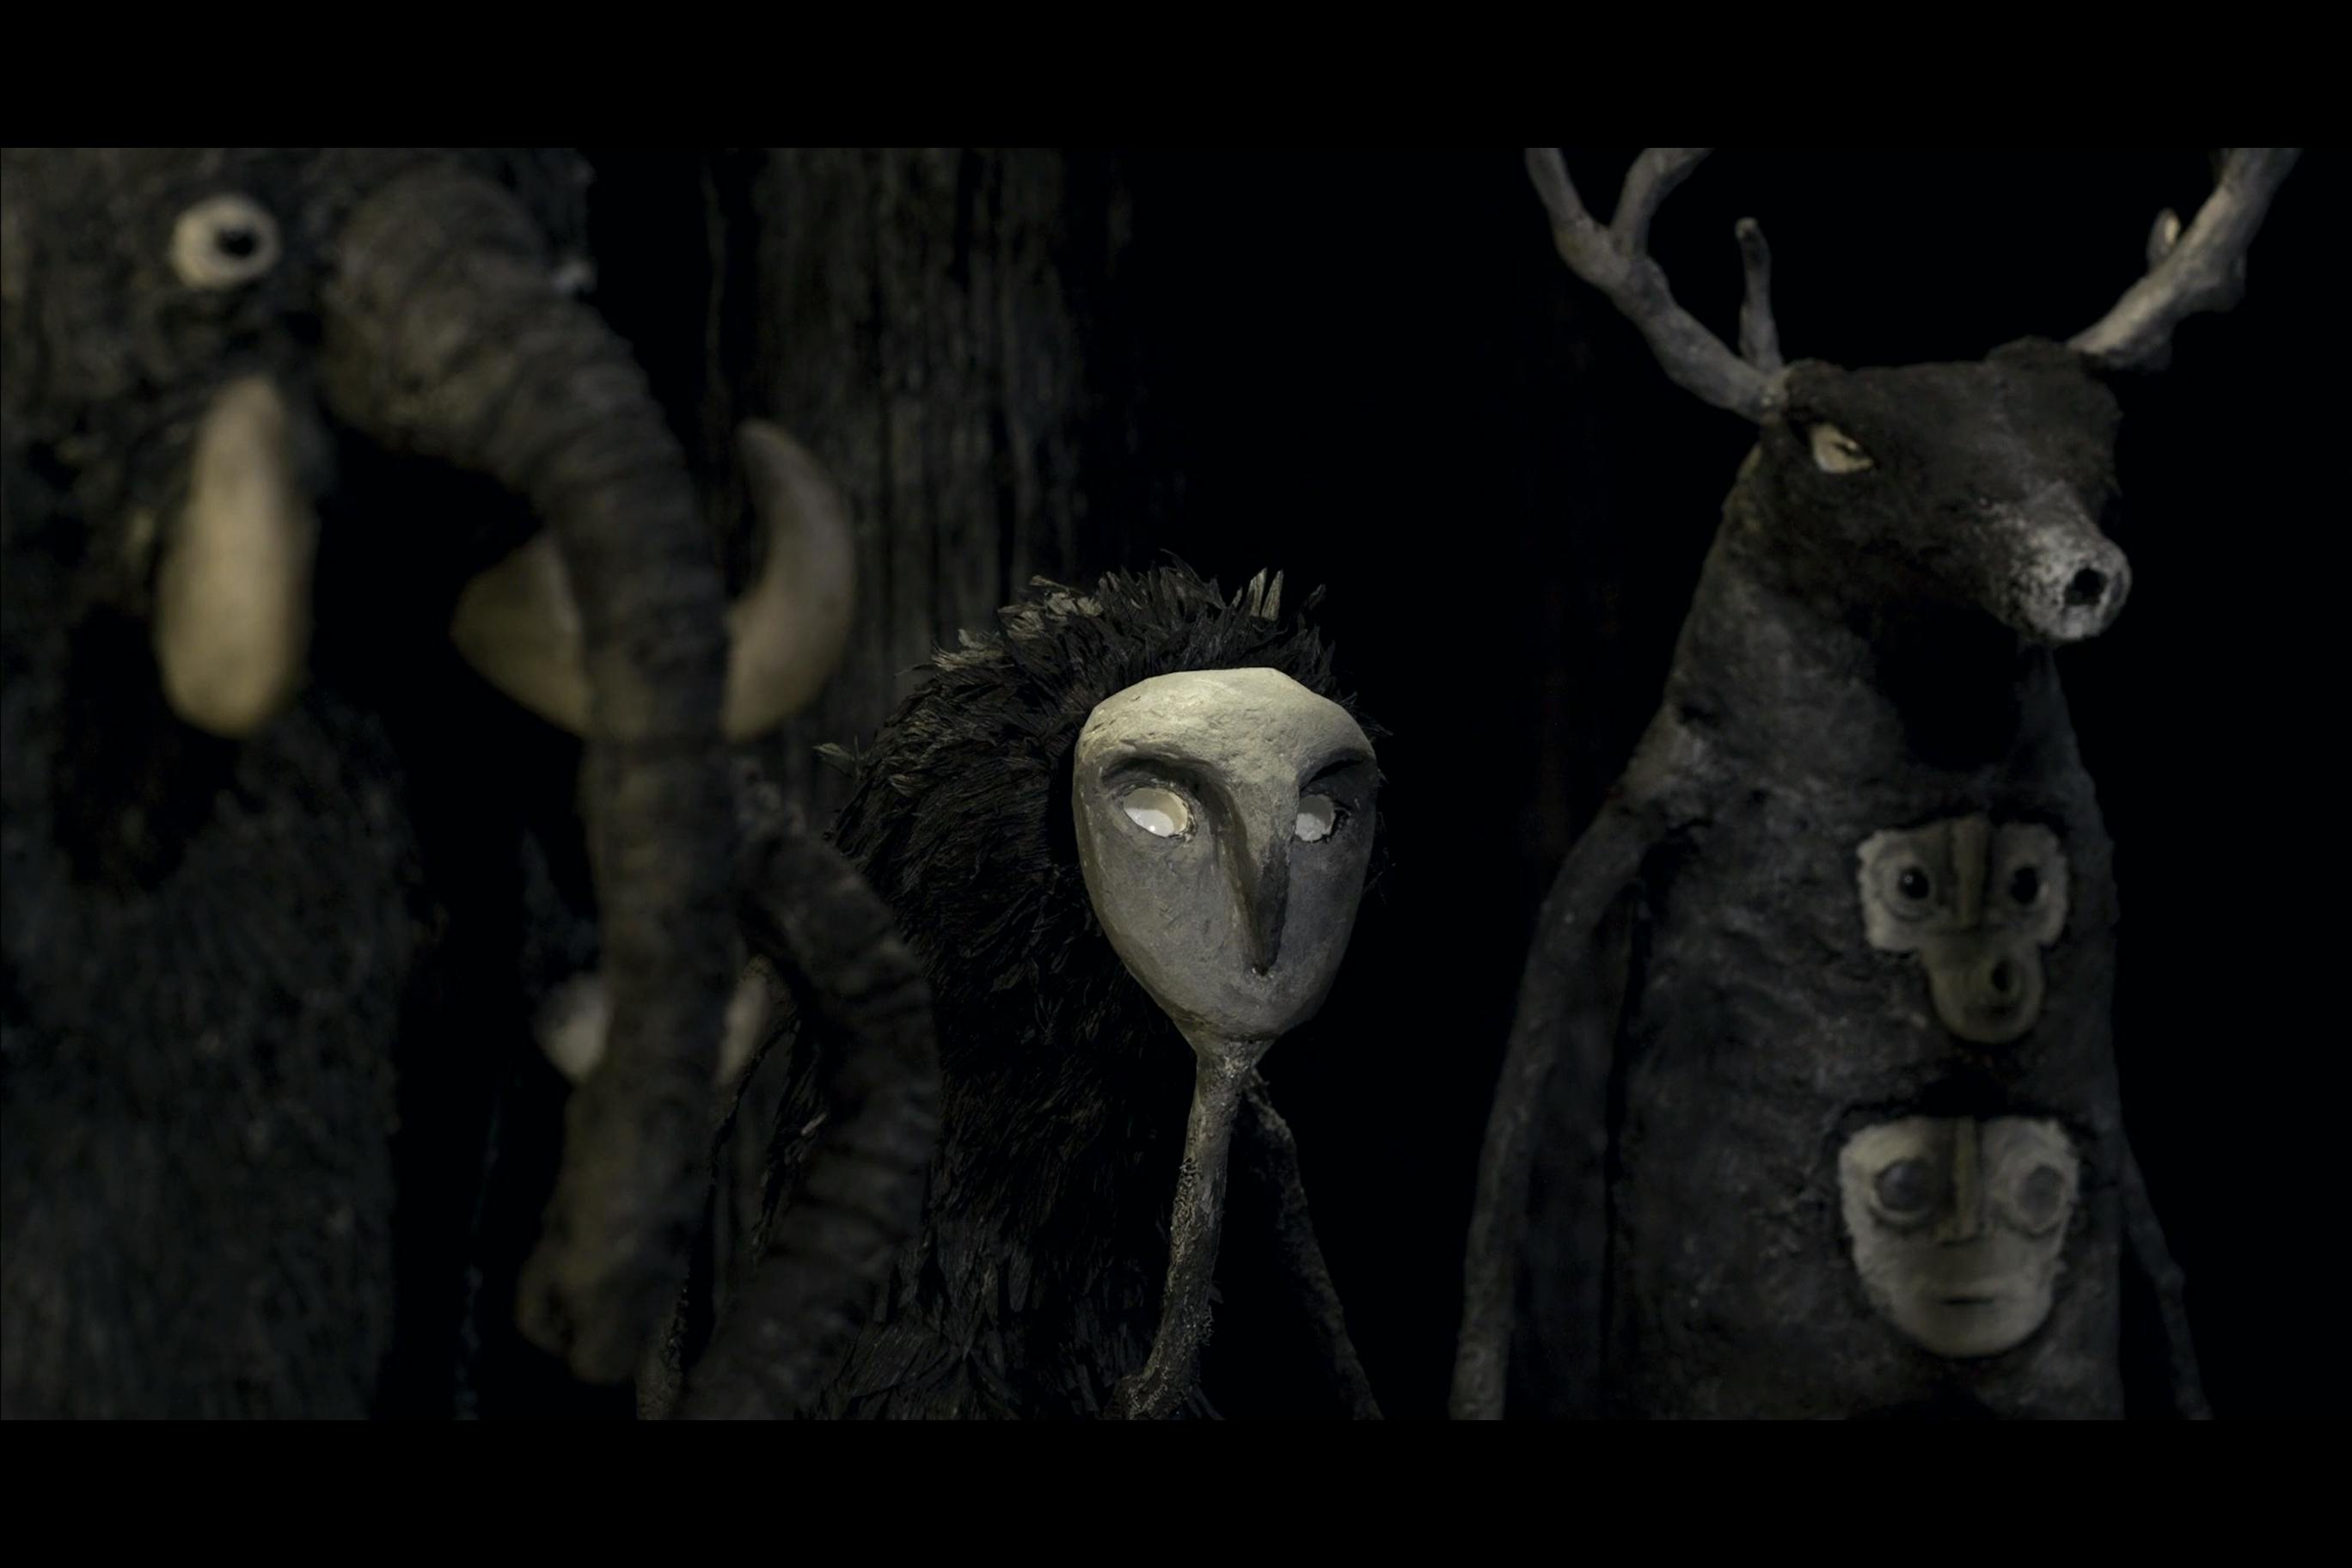 Three characters are looking off-screen to the right. The leftmost character is a character with an elephant face, and elephant faces for arms. The middle scaracter looks lik ea furry being wearin gan owl mask. The third character has antlers, and three faces stacked on top of each other like a Totem pole